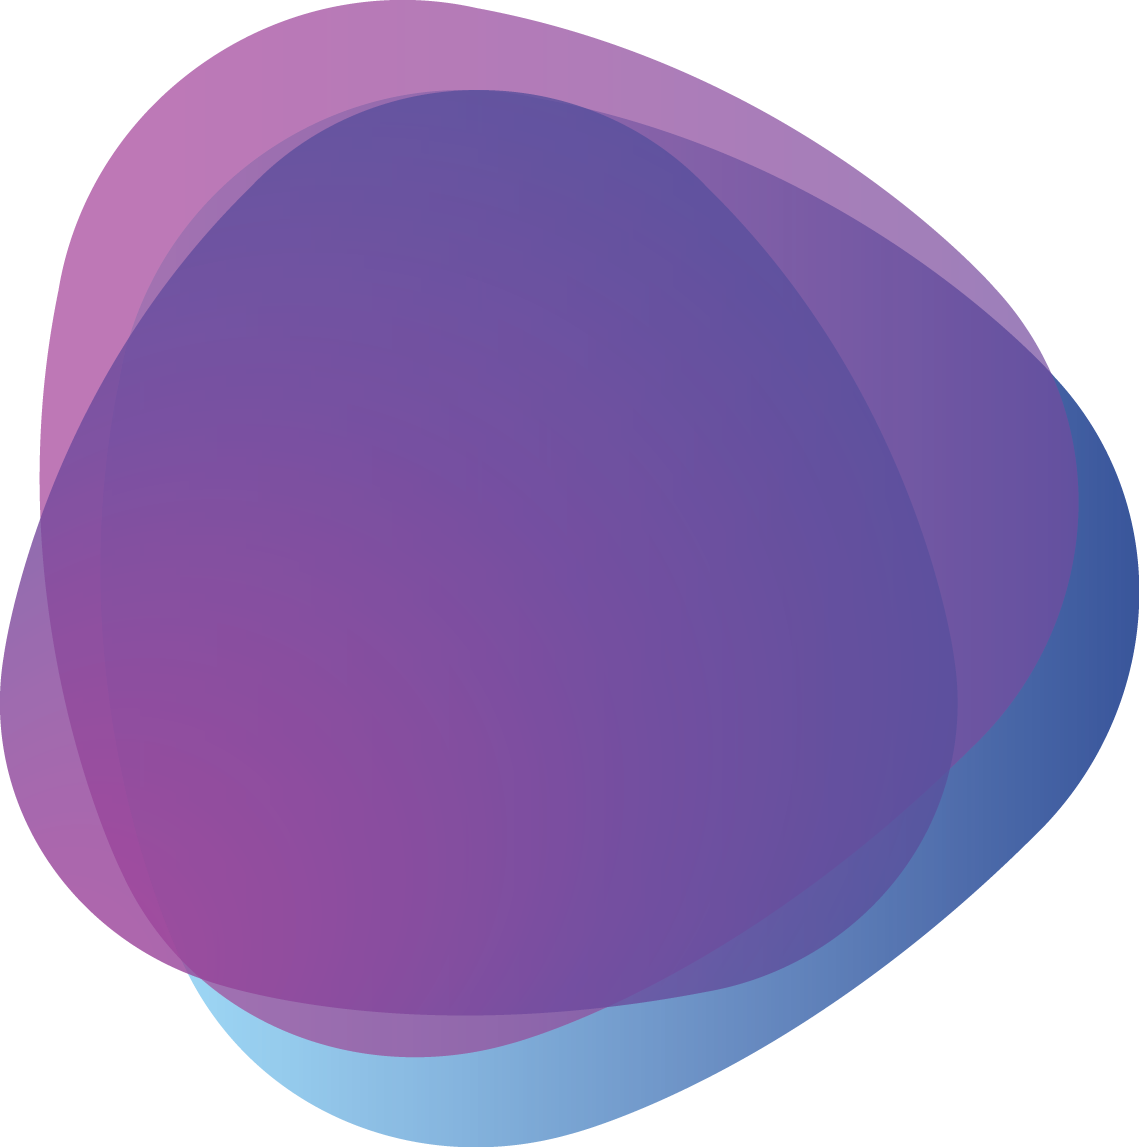 A Purple And Blue Rounded Shapes